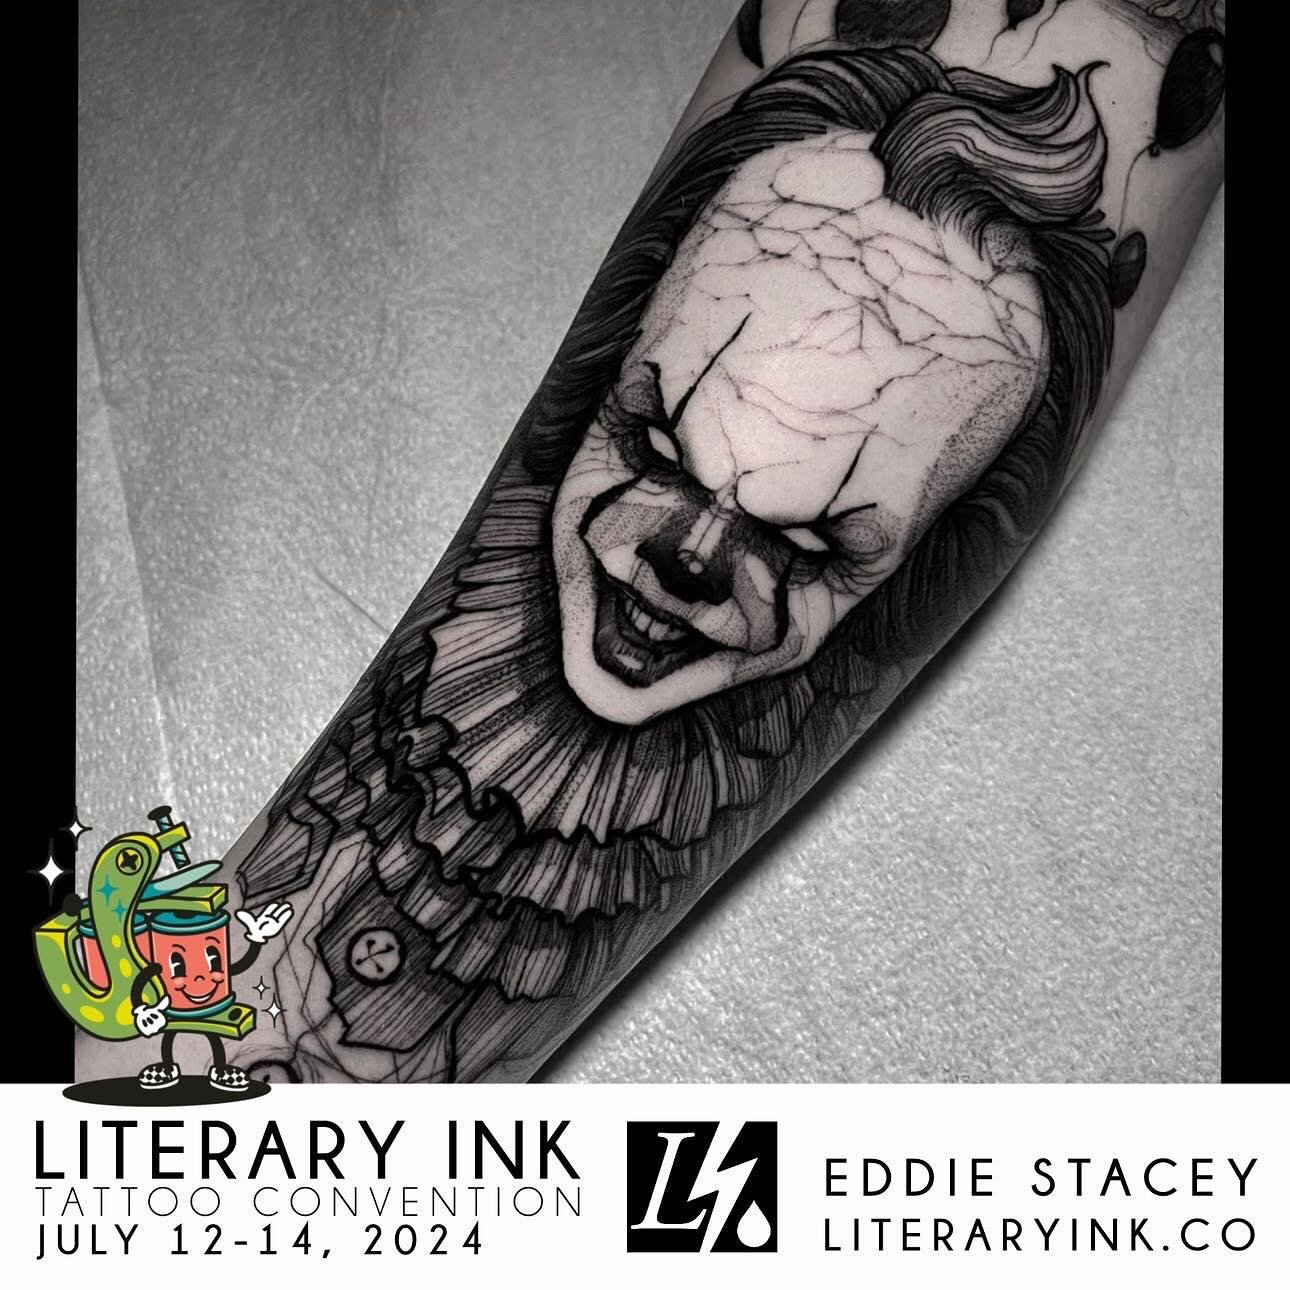 CHATTANOOGA! @literaryink returns July 12-14! What is Literary Ink you ask?! It is a book themed tattoo convention! What is a book themed tattoo convention you ask? Well it is a place where we bring Tattoo artists from all over the world to tattoo yo